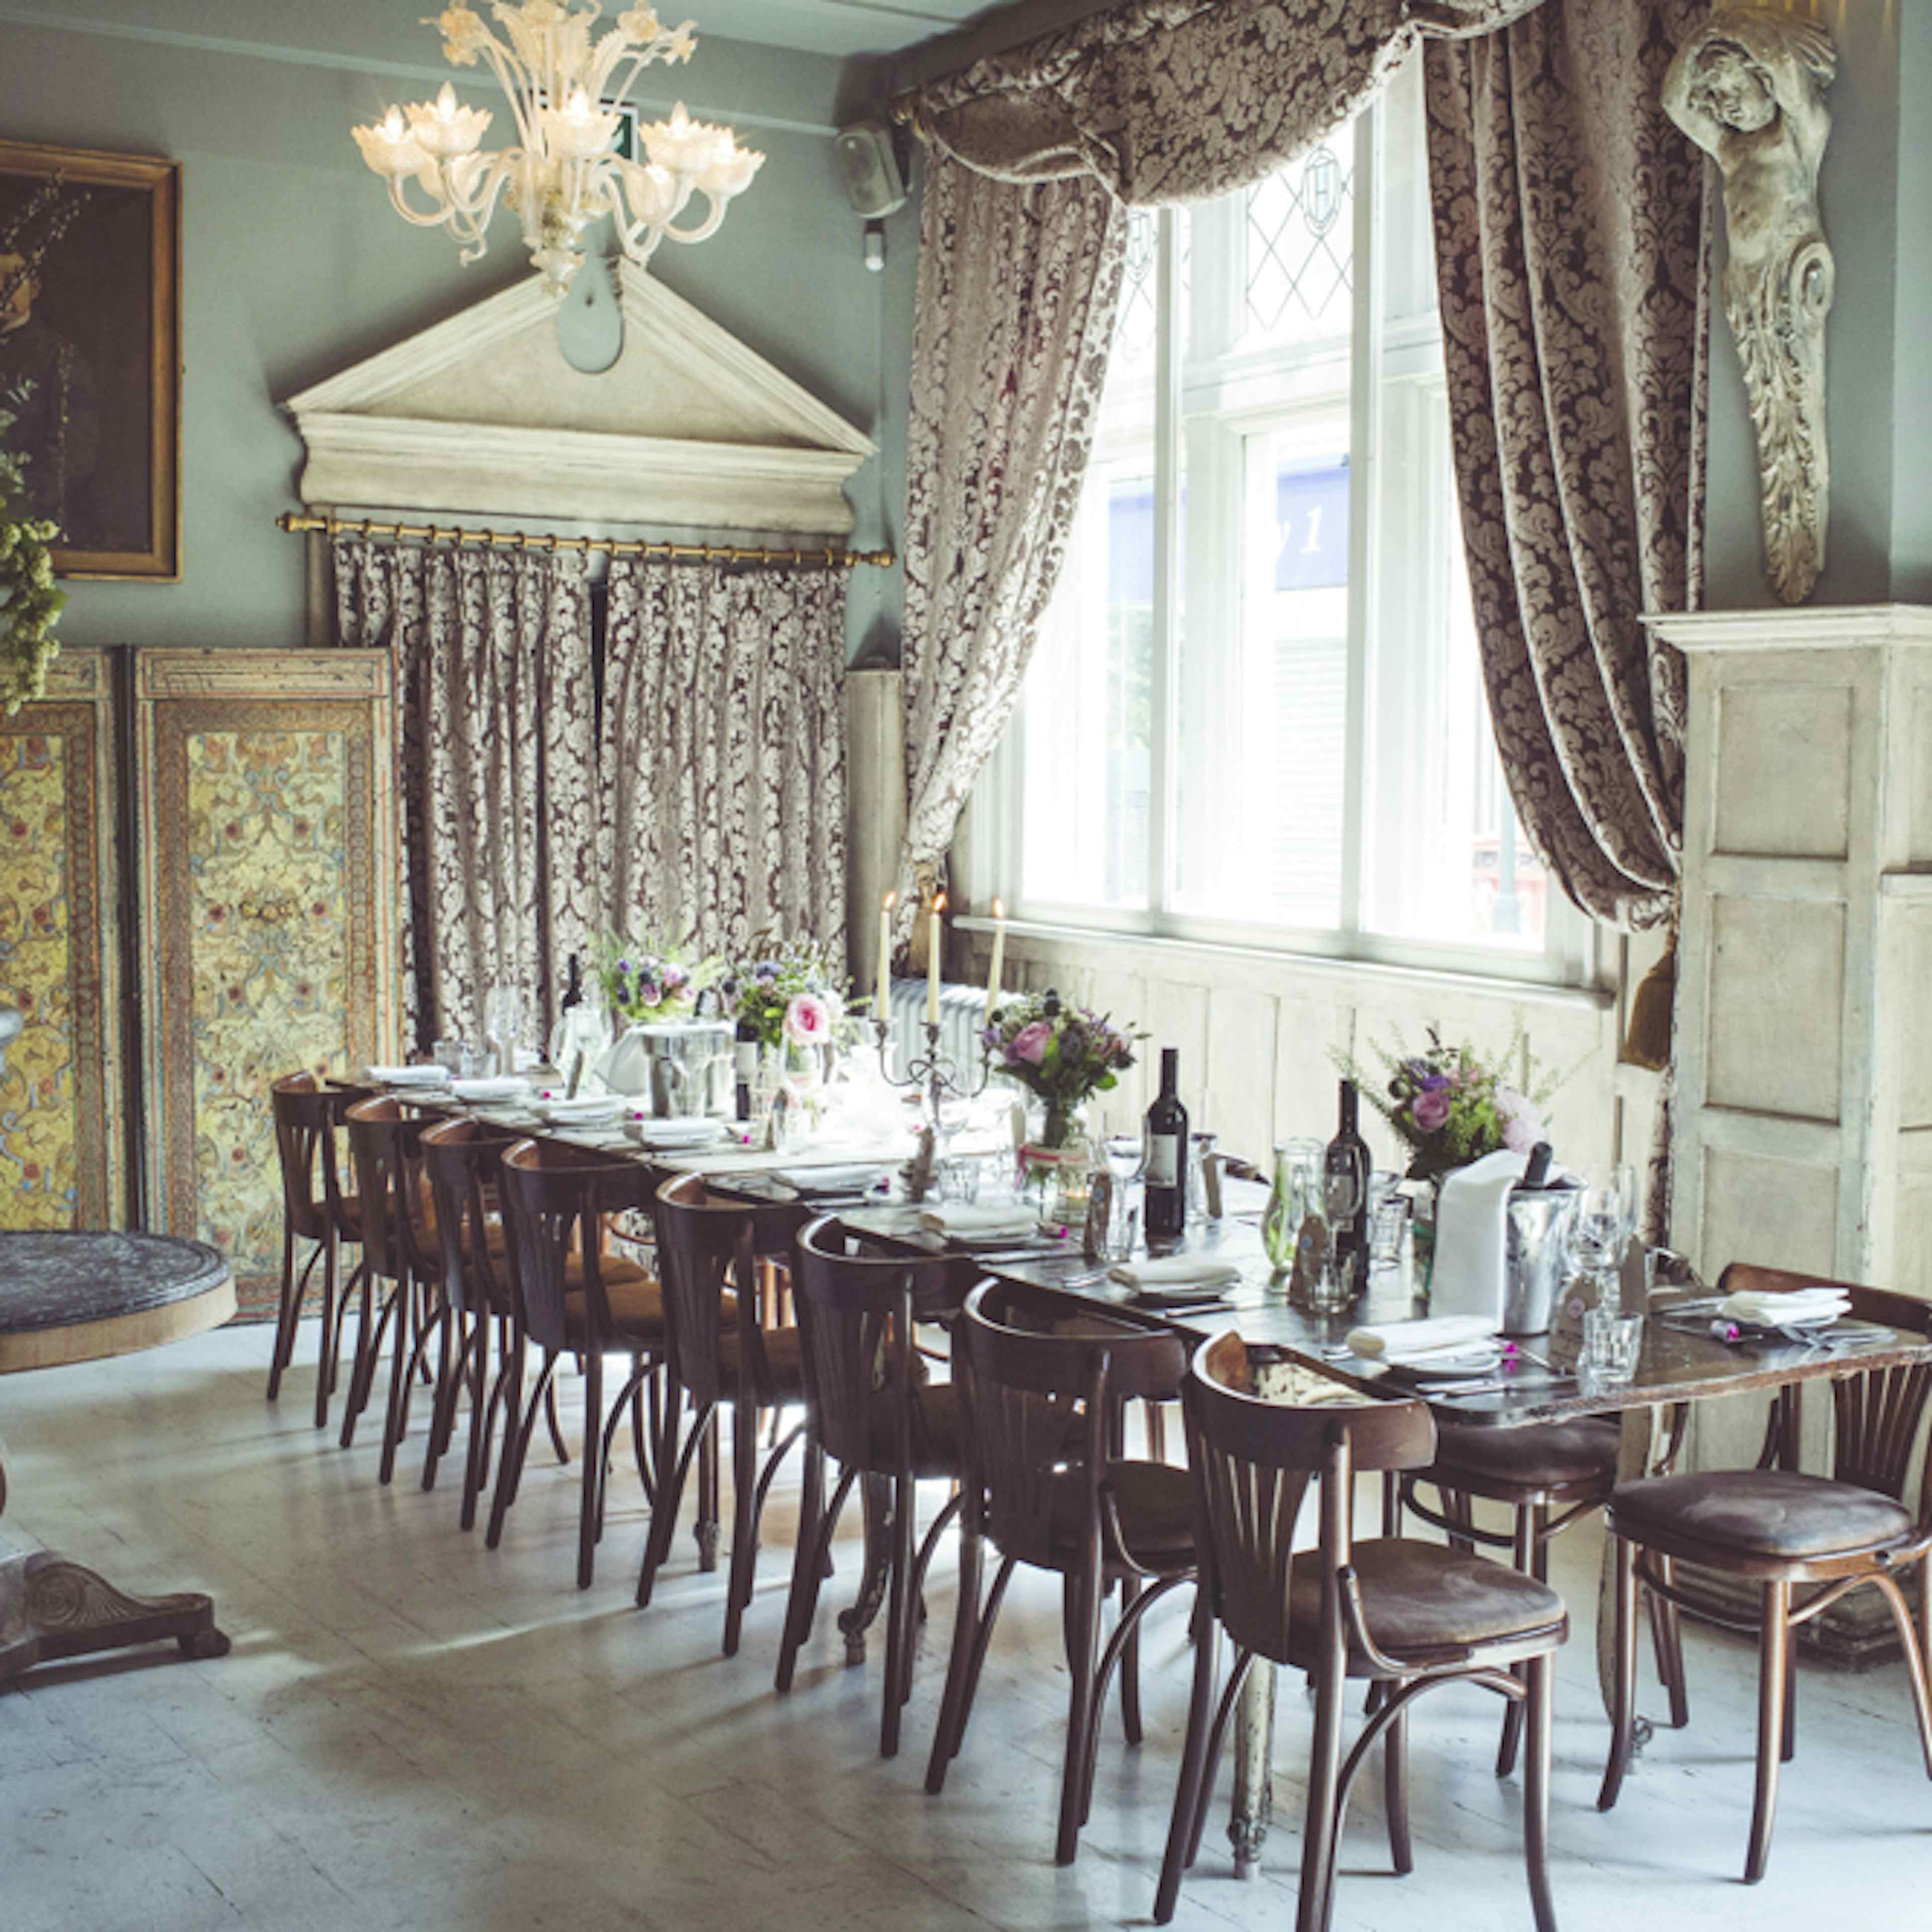 Paradise by way of Kensal Green - Dining Room image 2